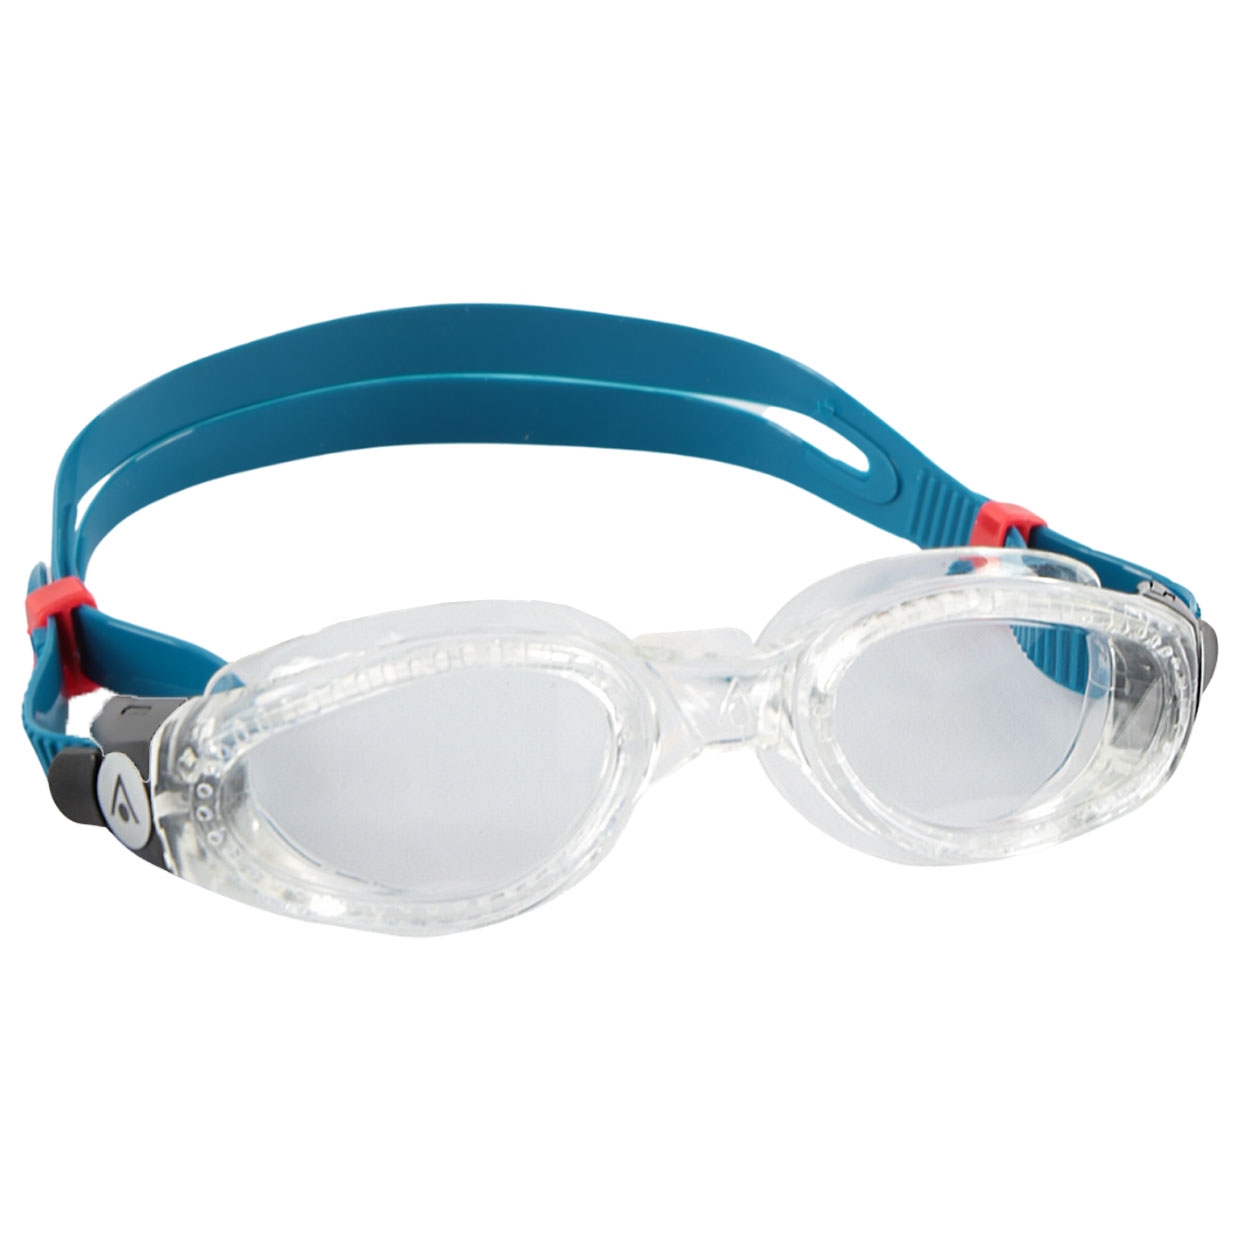 Schwimmbrille Kaiman Compact fit